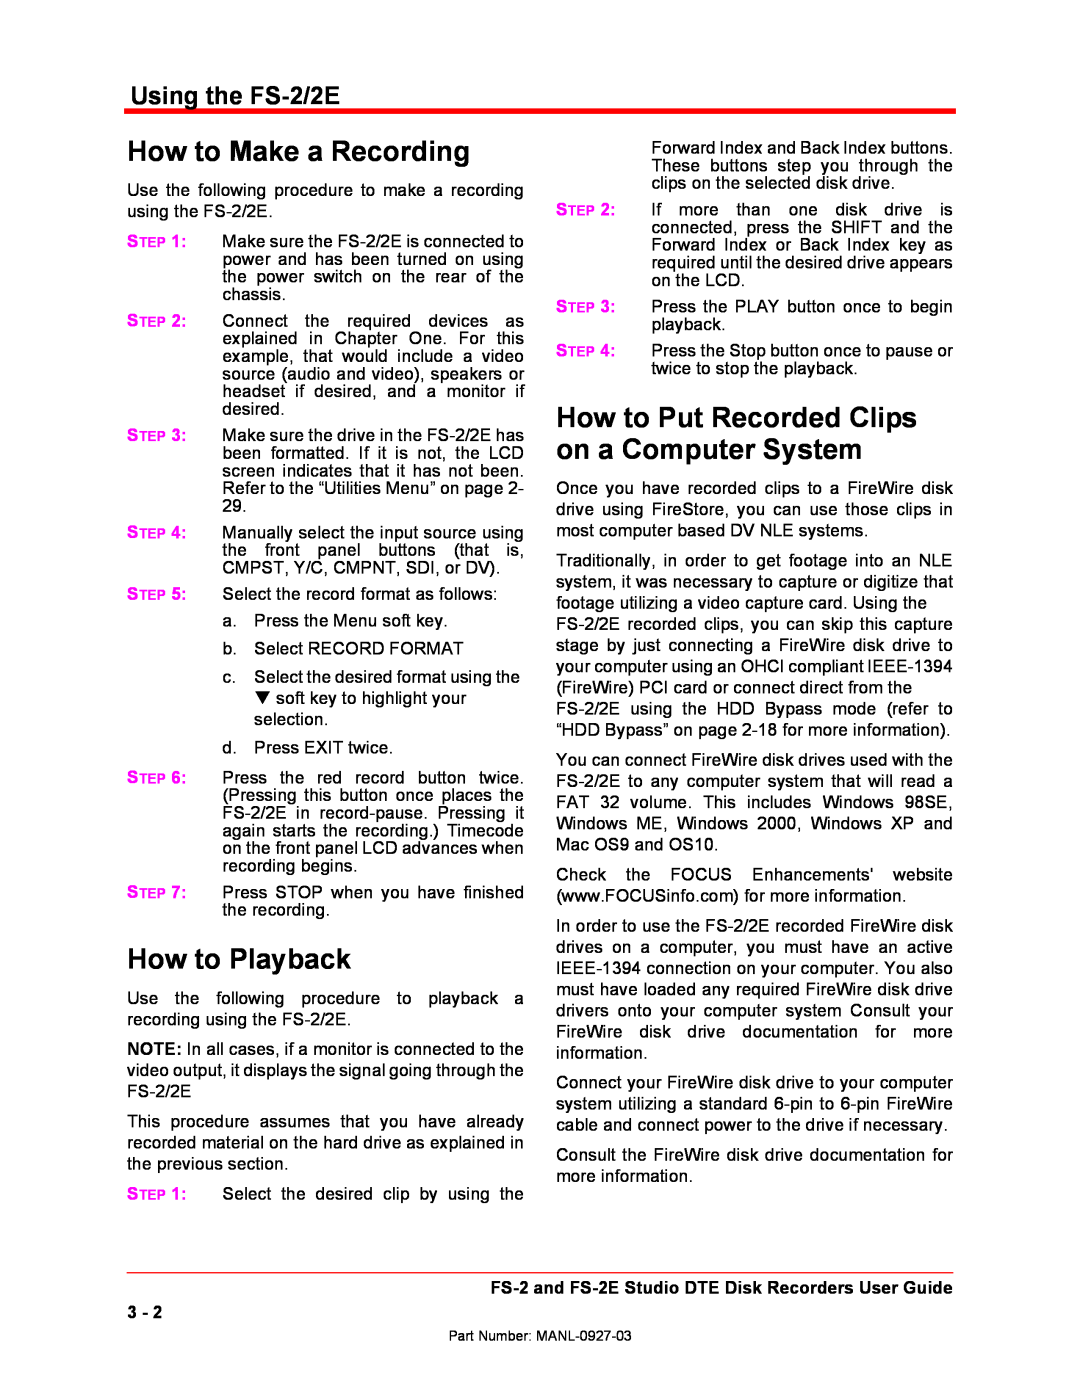 FOCUS Enhancements FS-2/2E manual How to Make a Recording, How to Playback, How to Put Recorded Clips on a Computer System 